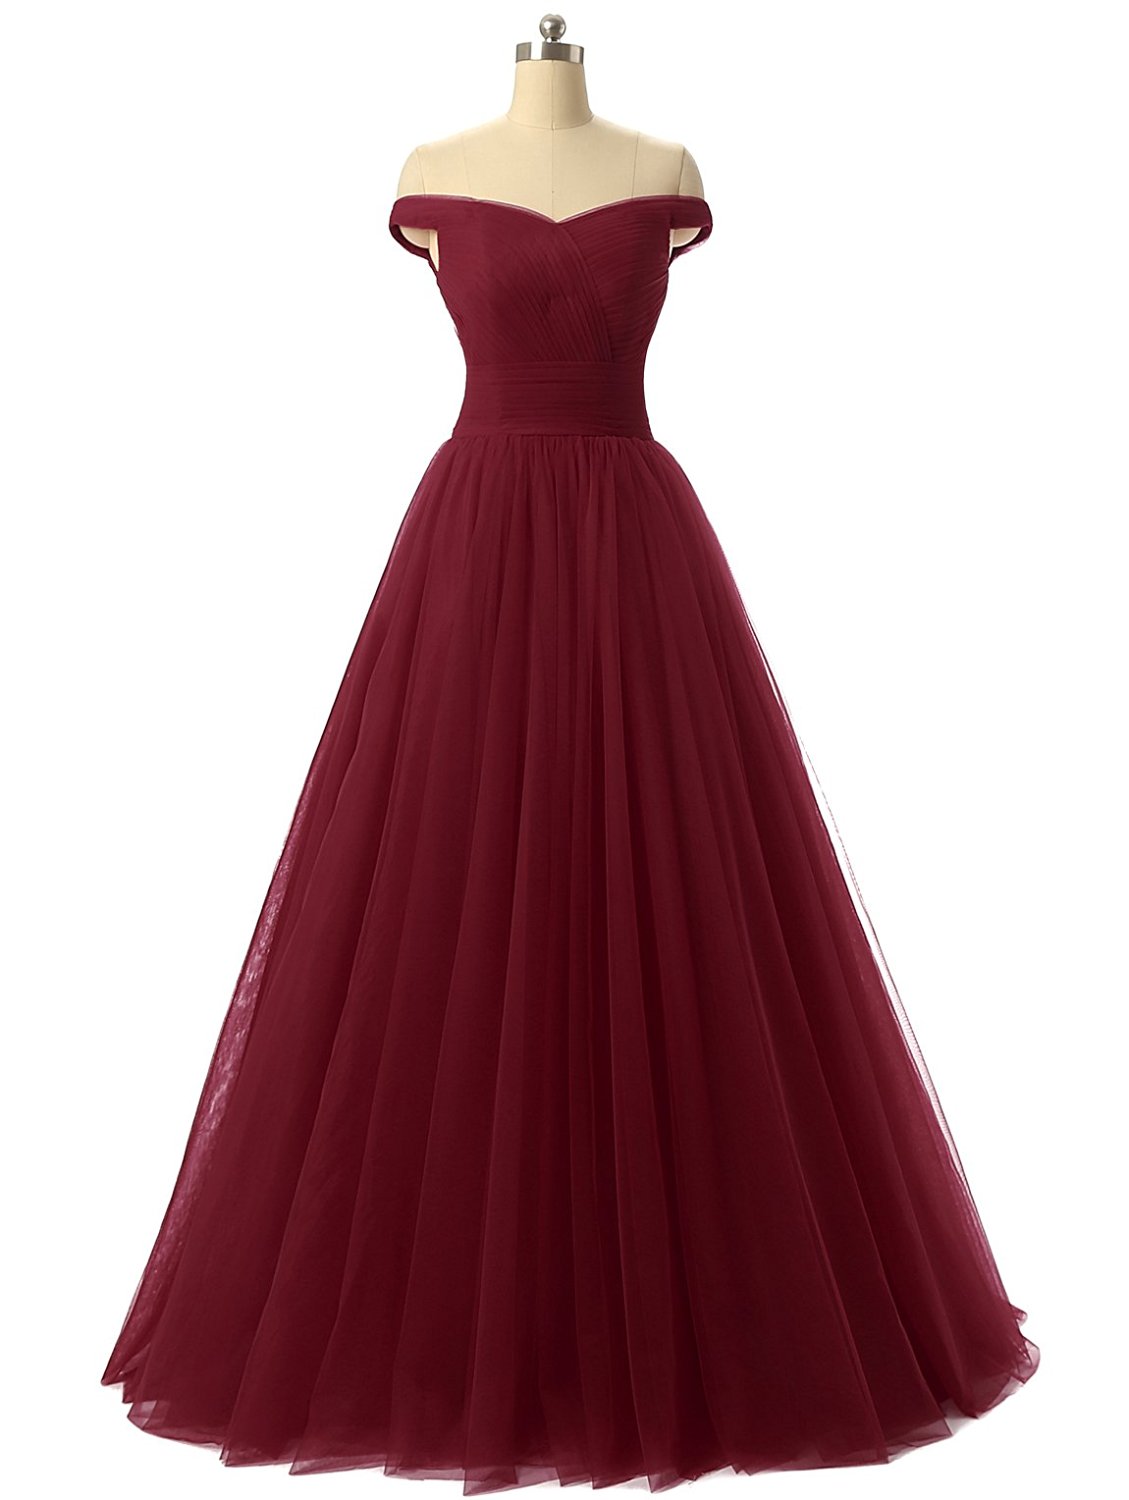 A-line Tulle Prom Formal Evening Dress, Sexy Burgundy Prom Dresses, Red Prom Dress, Tulle Prom Dress, Off The Shoulder Prom Dress, Homecoming